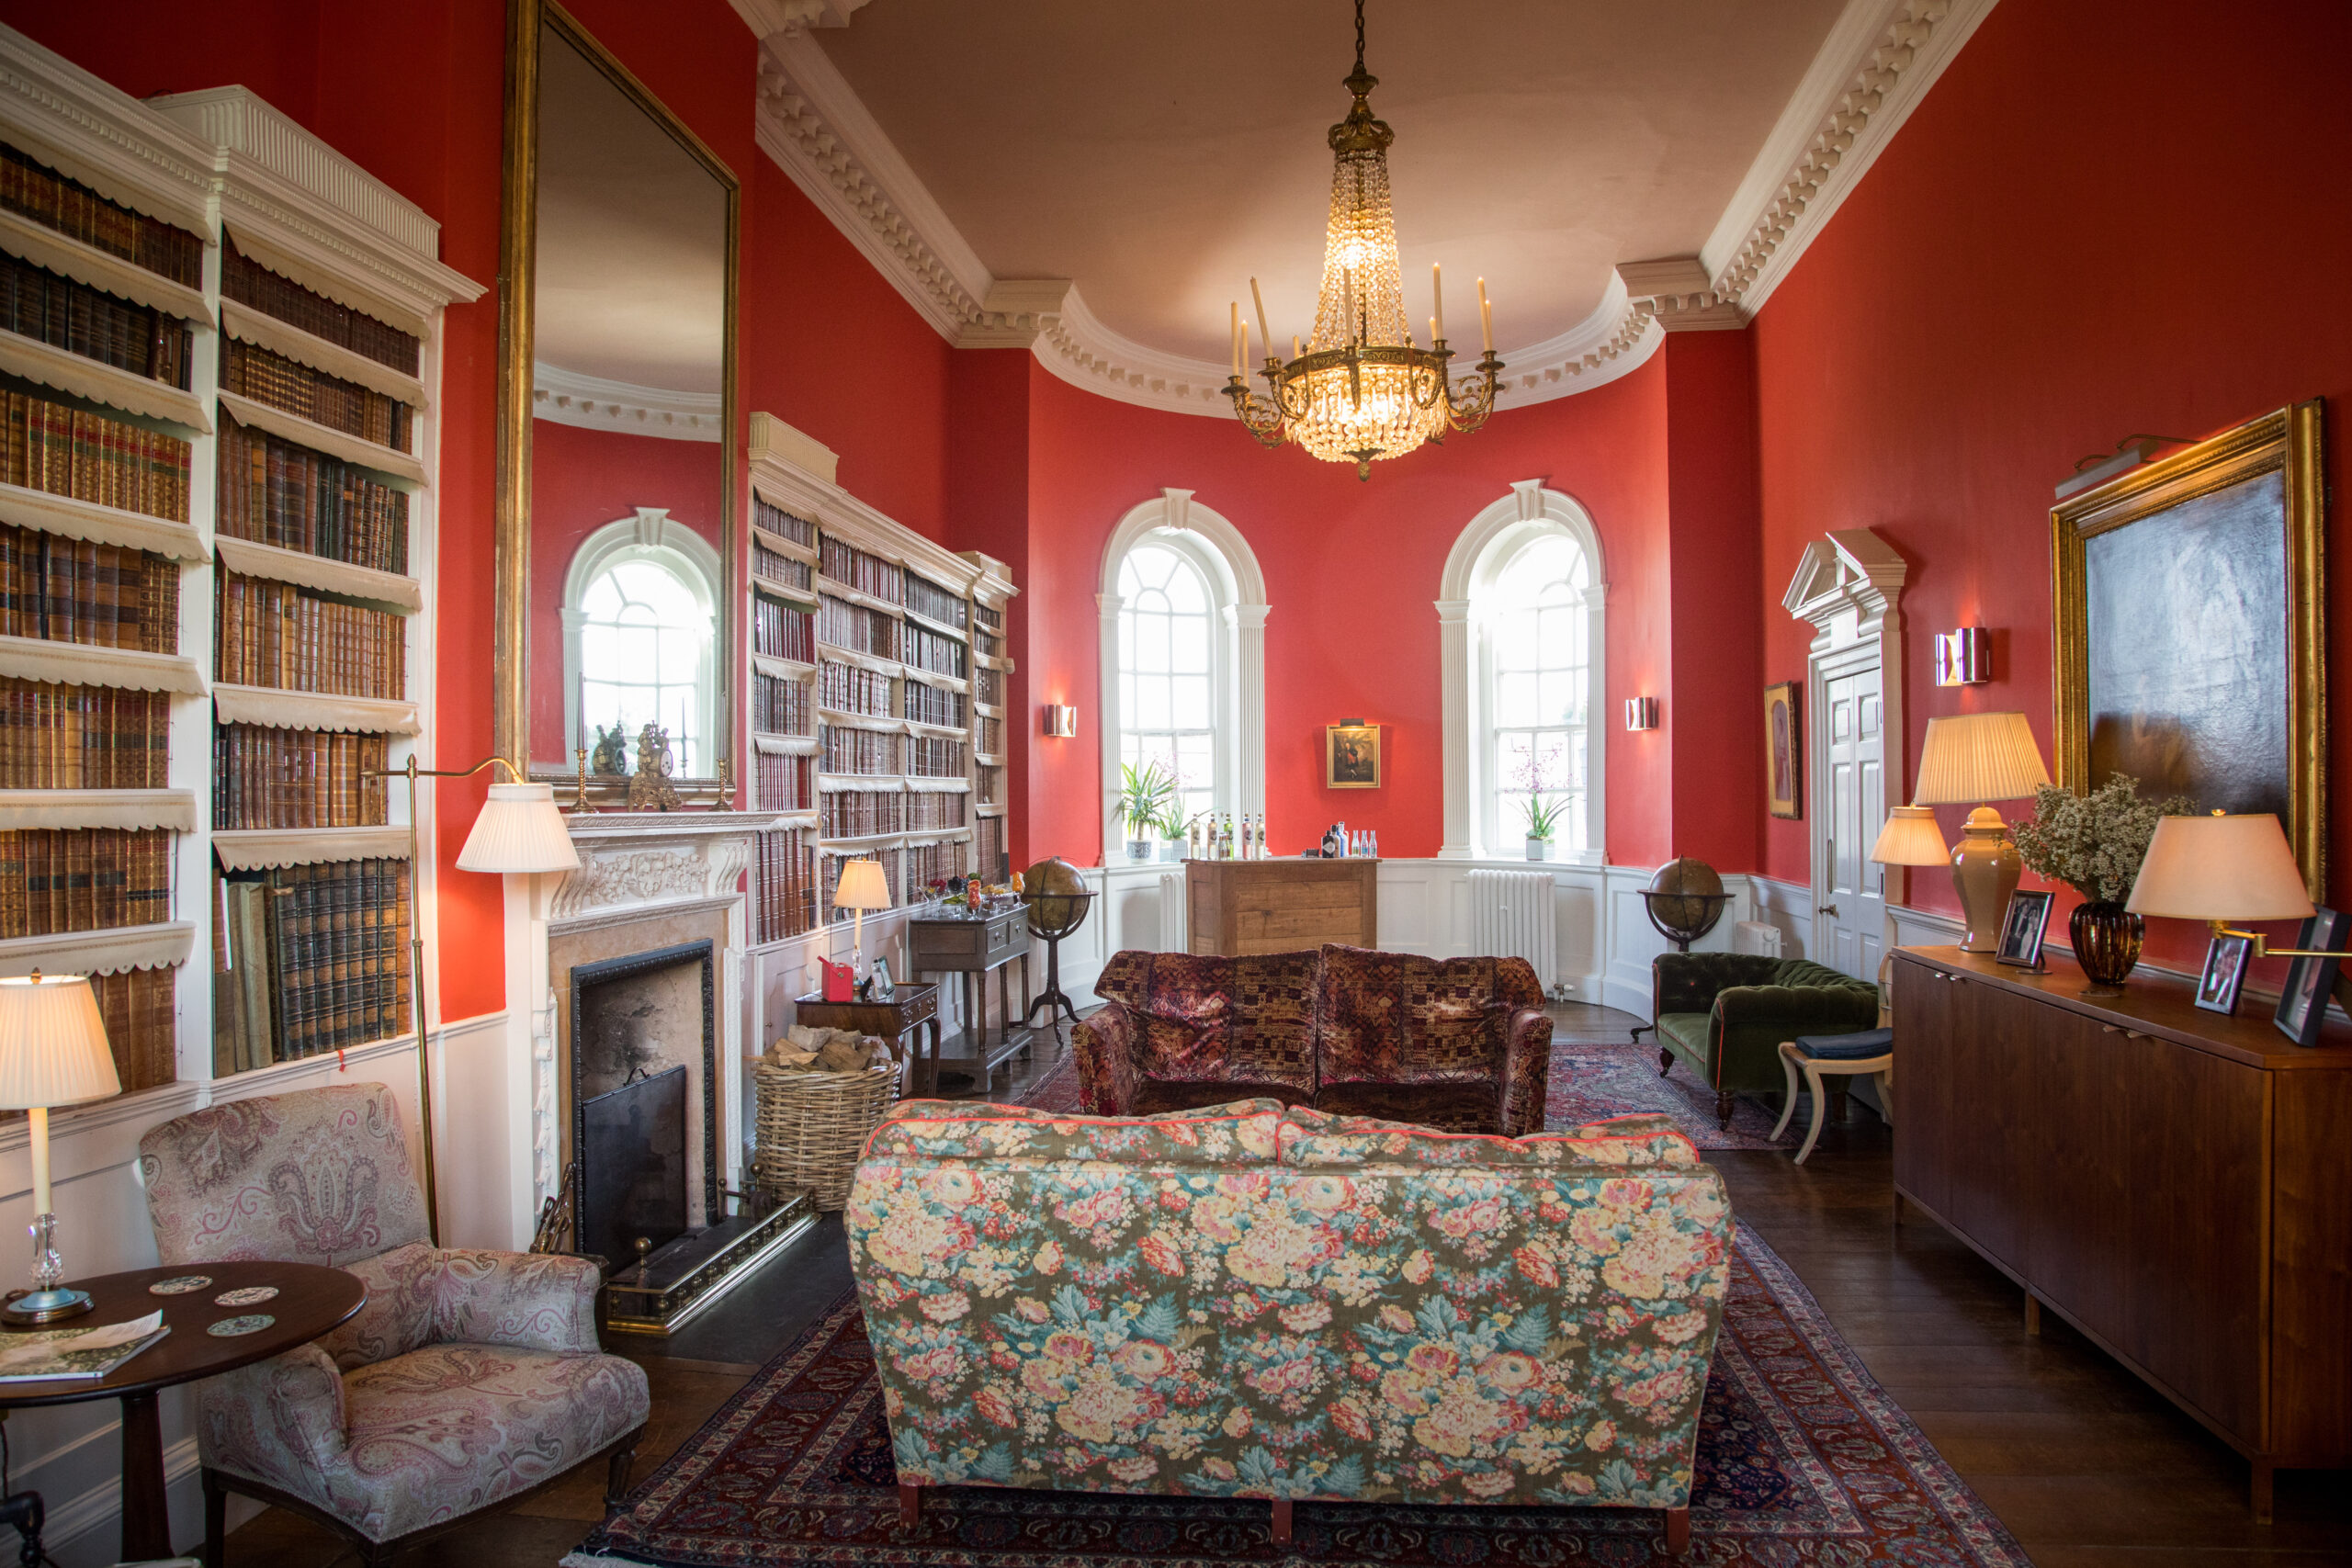 The Library at luxury wedding venue Iscoyd Park photographed by Helen Baly